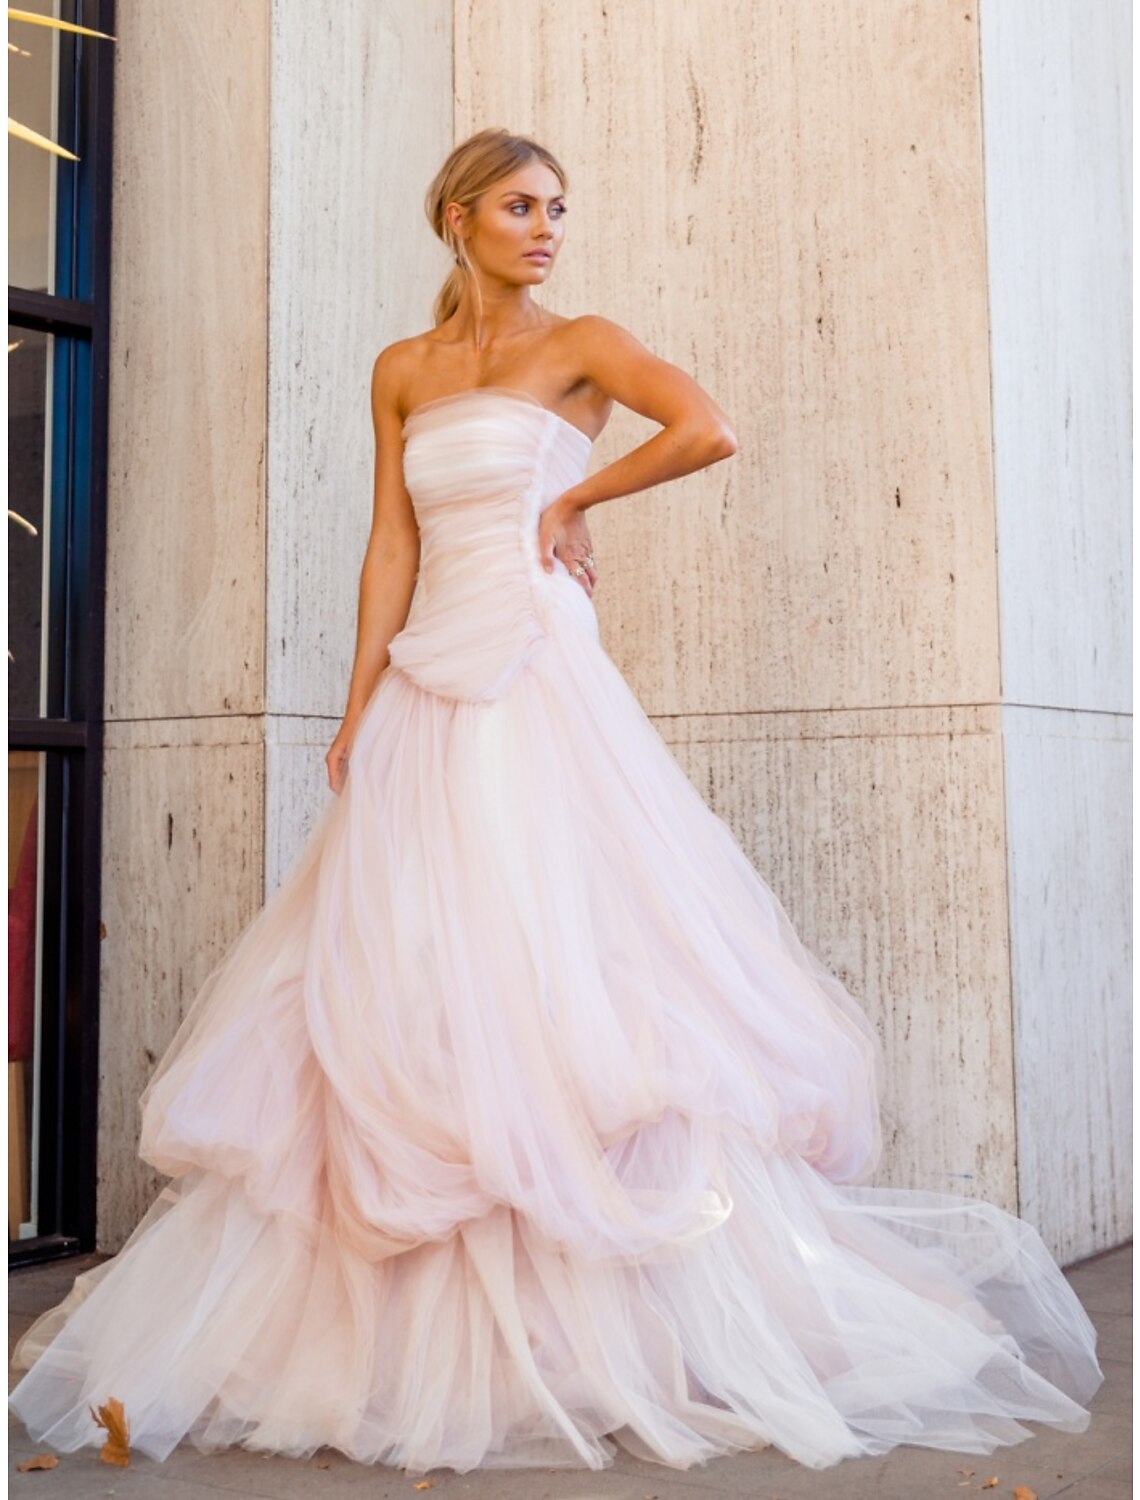 A-Line Evening Gown Elegant Dress Formal Court Train Sleeveless Strapless Tulle with Pleats Ruched